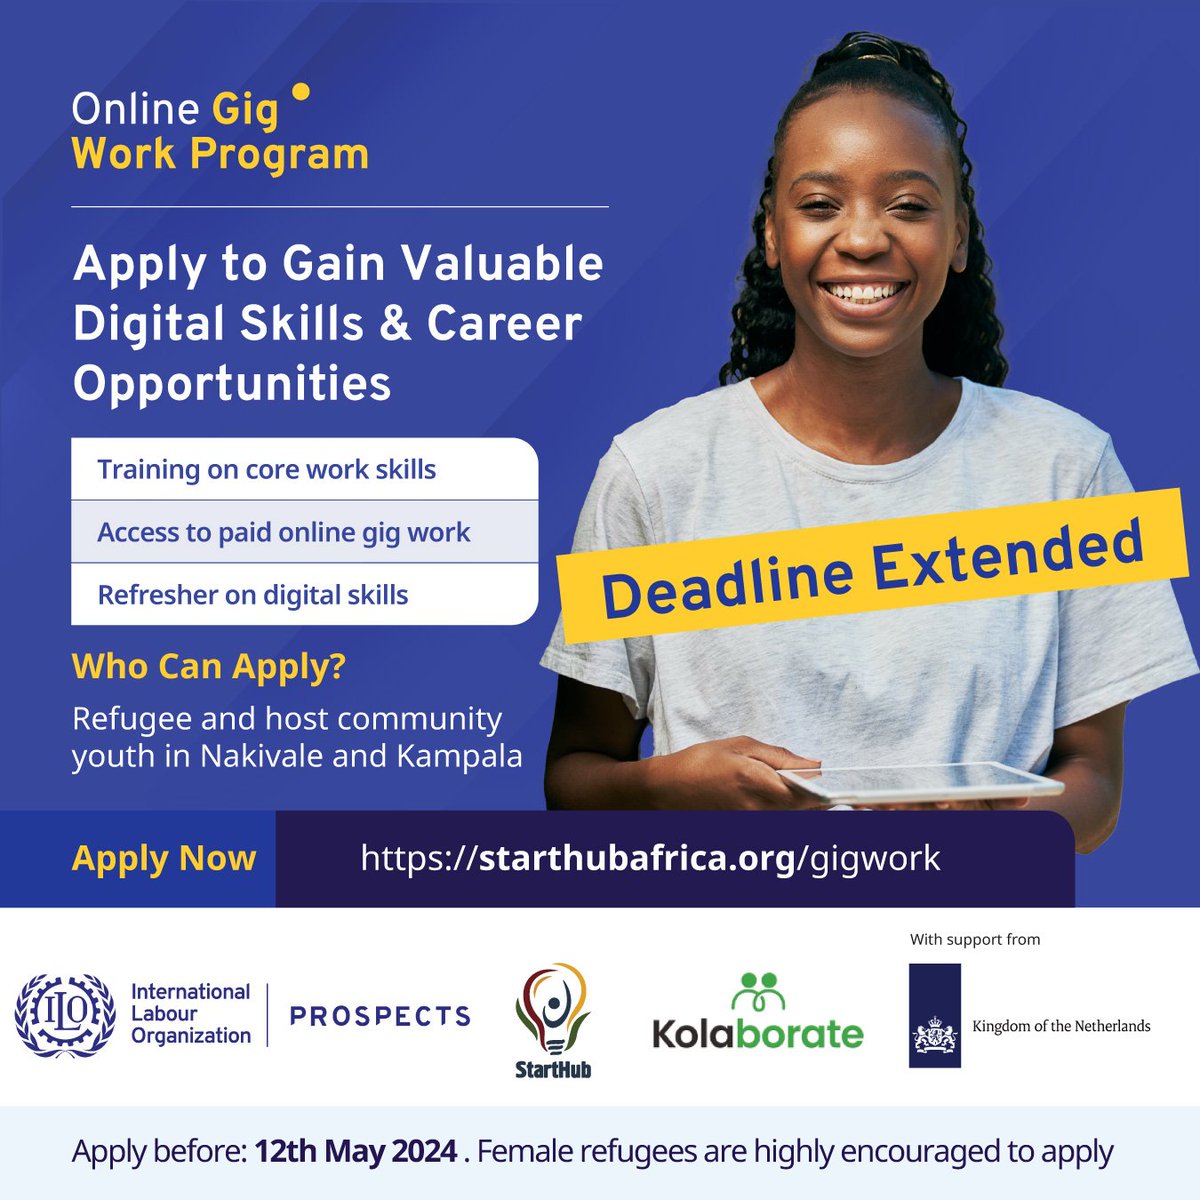 ⏰ Time is running out! Only two days left to apply for the Online gig work program. Don't miss out on the chance to gain valuable digital skills and career opportunities. Female refugees are highly encouraged to apply. click here to apply. starthubafrica.org/gigwork